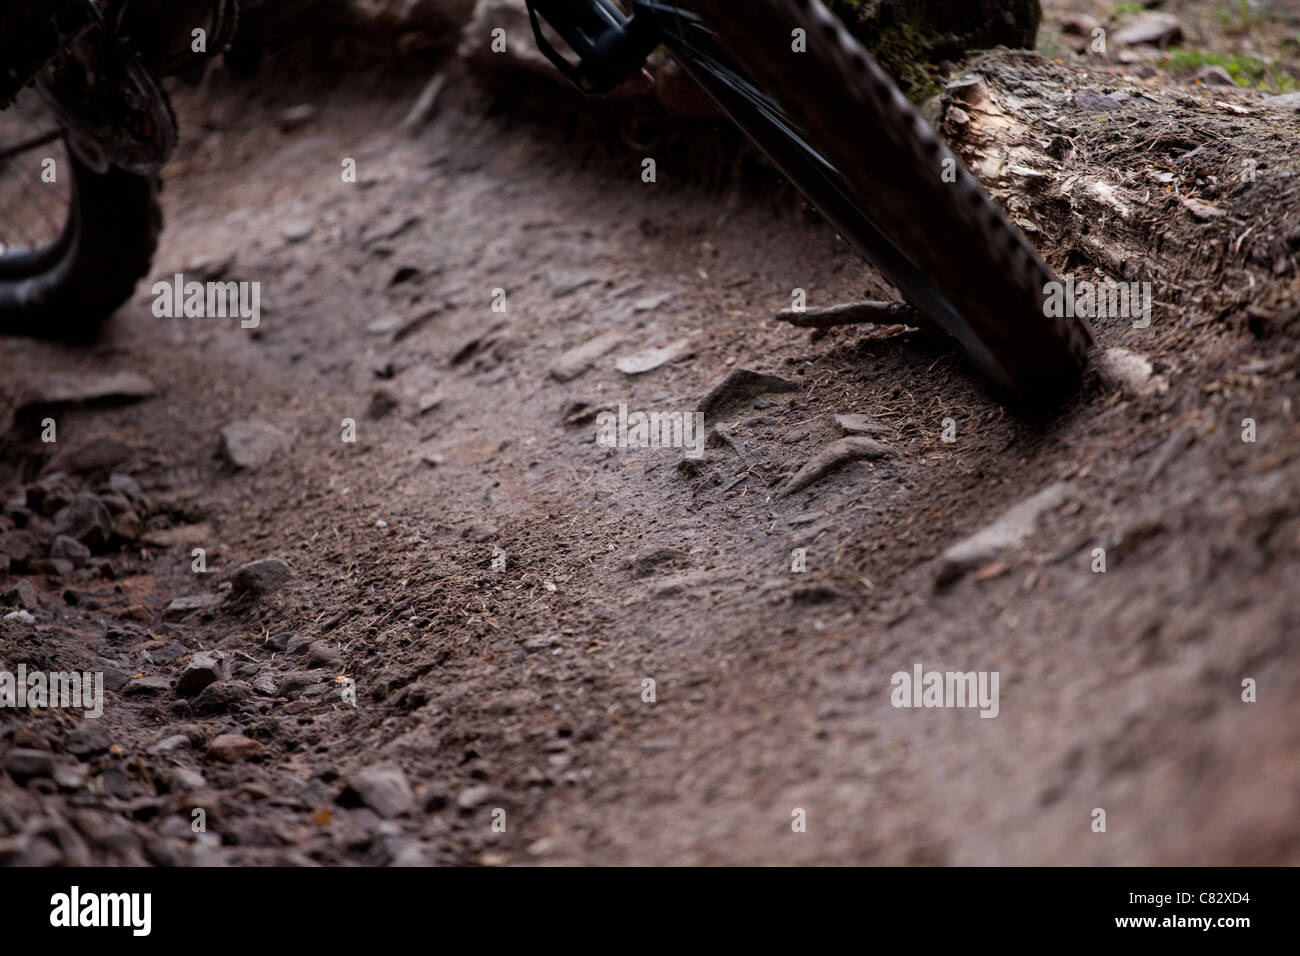 Close up shot of the front wheel of a mountain bike riding round a berm Stock Photo